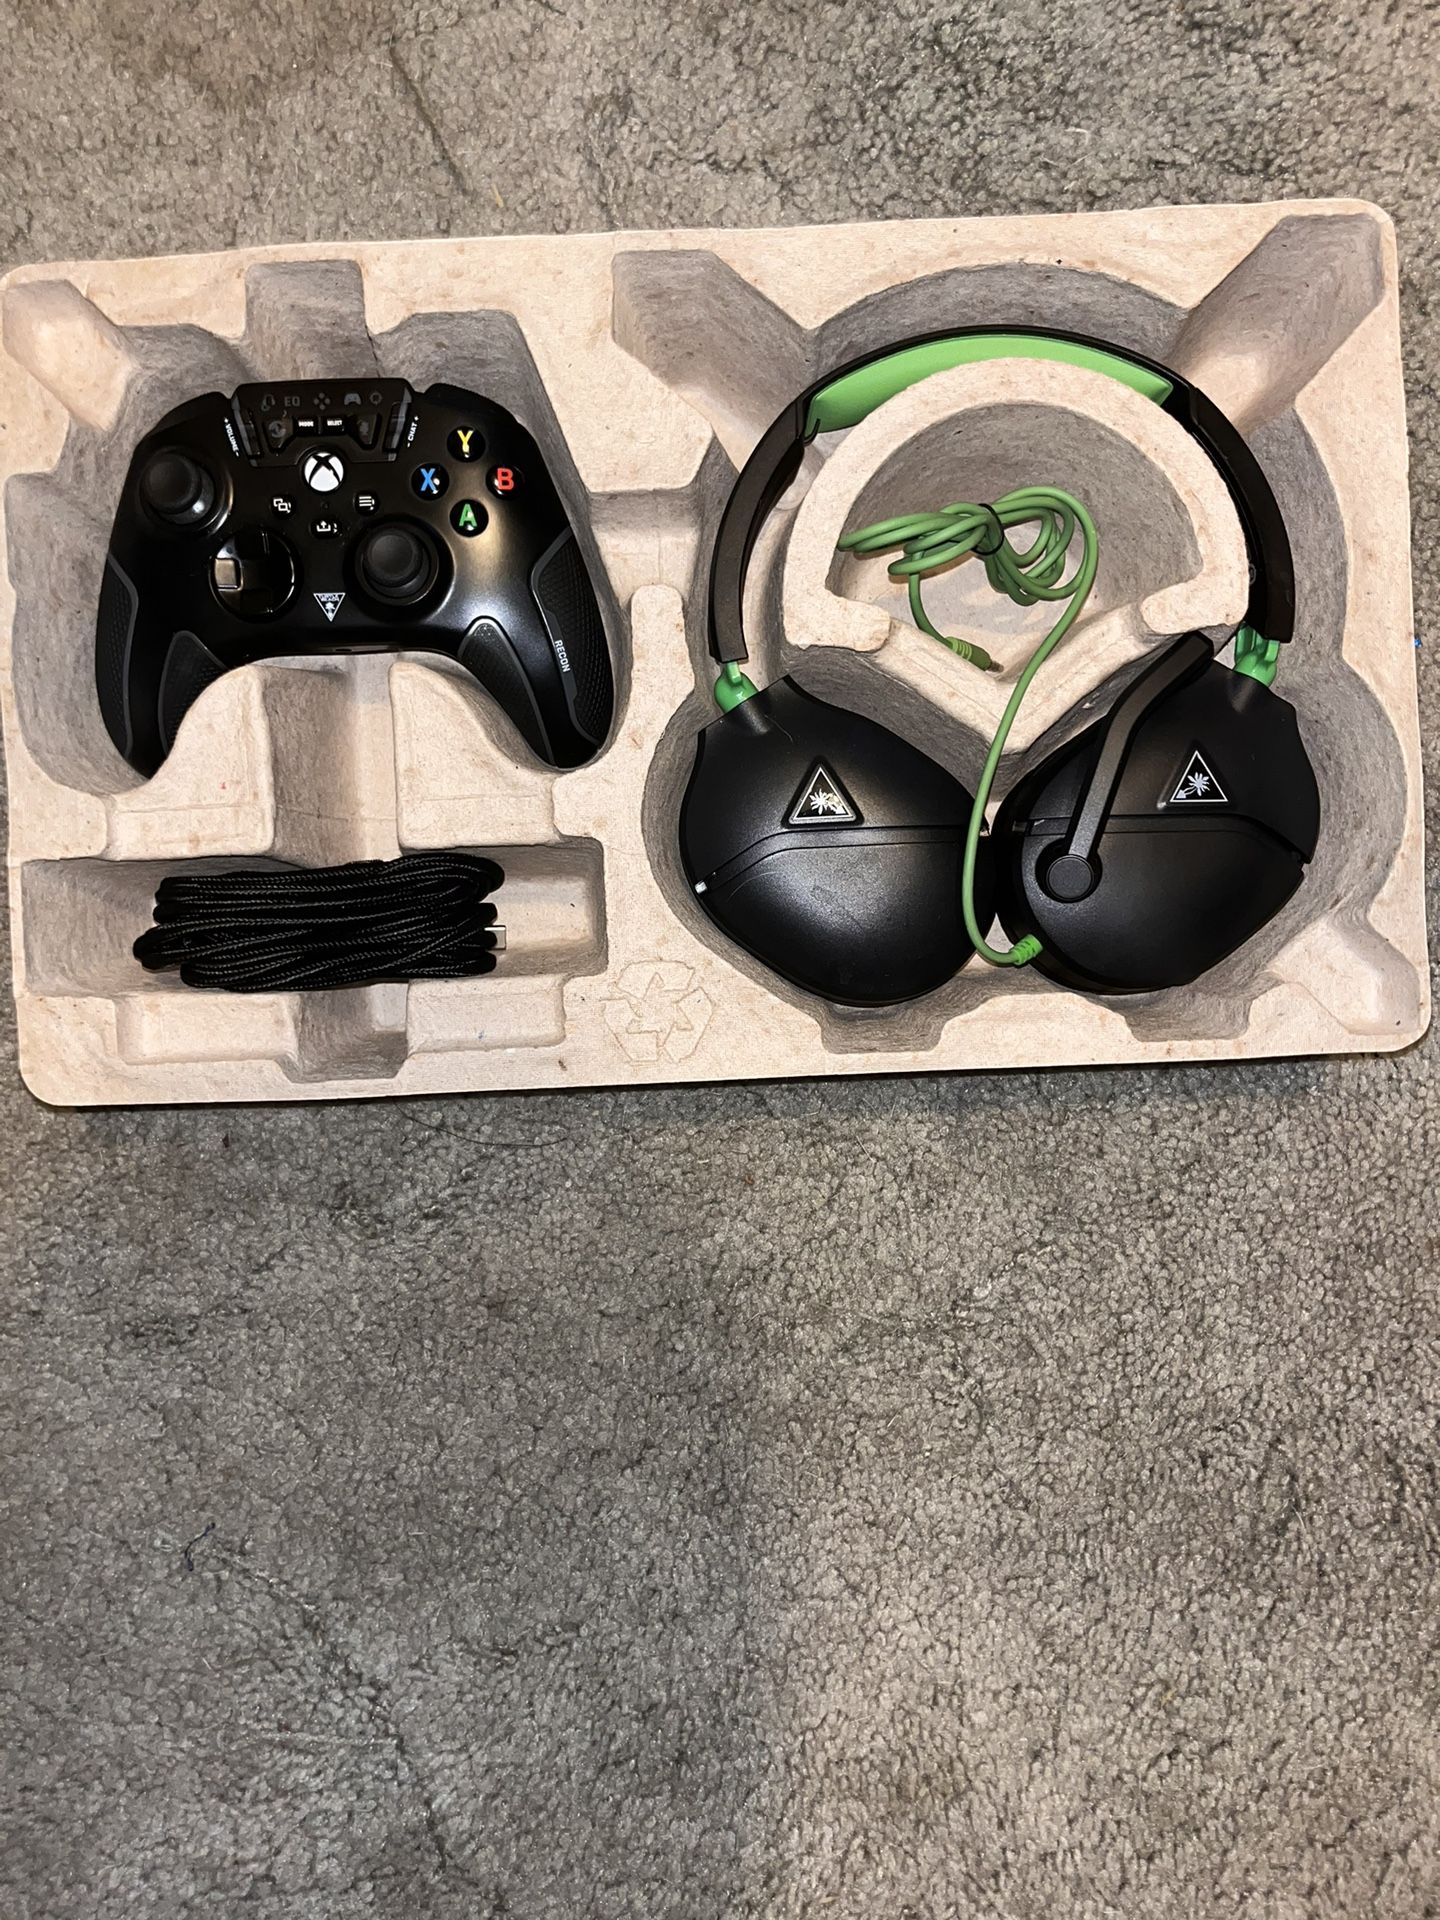 Turtle Beach Headset And Controller Combo